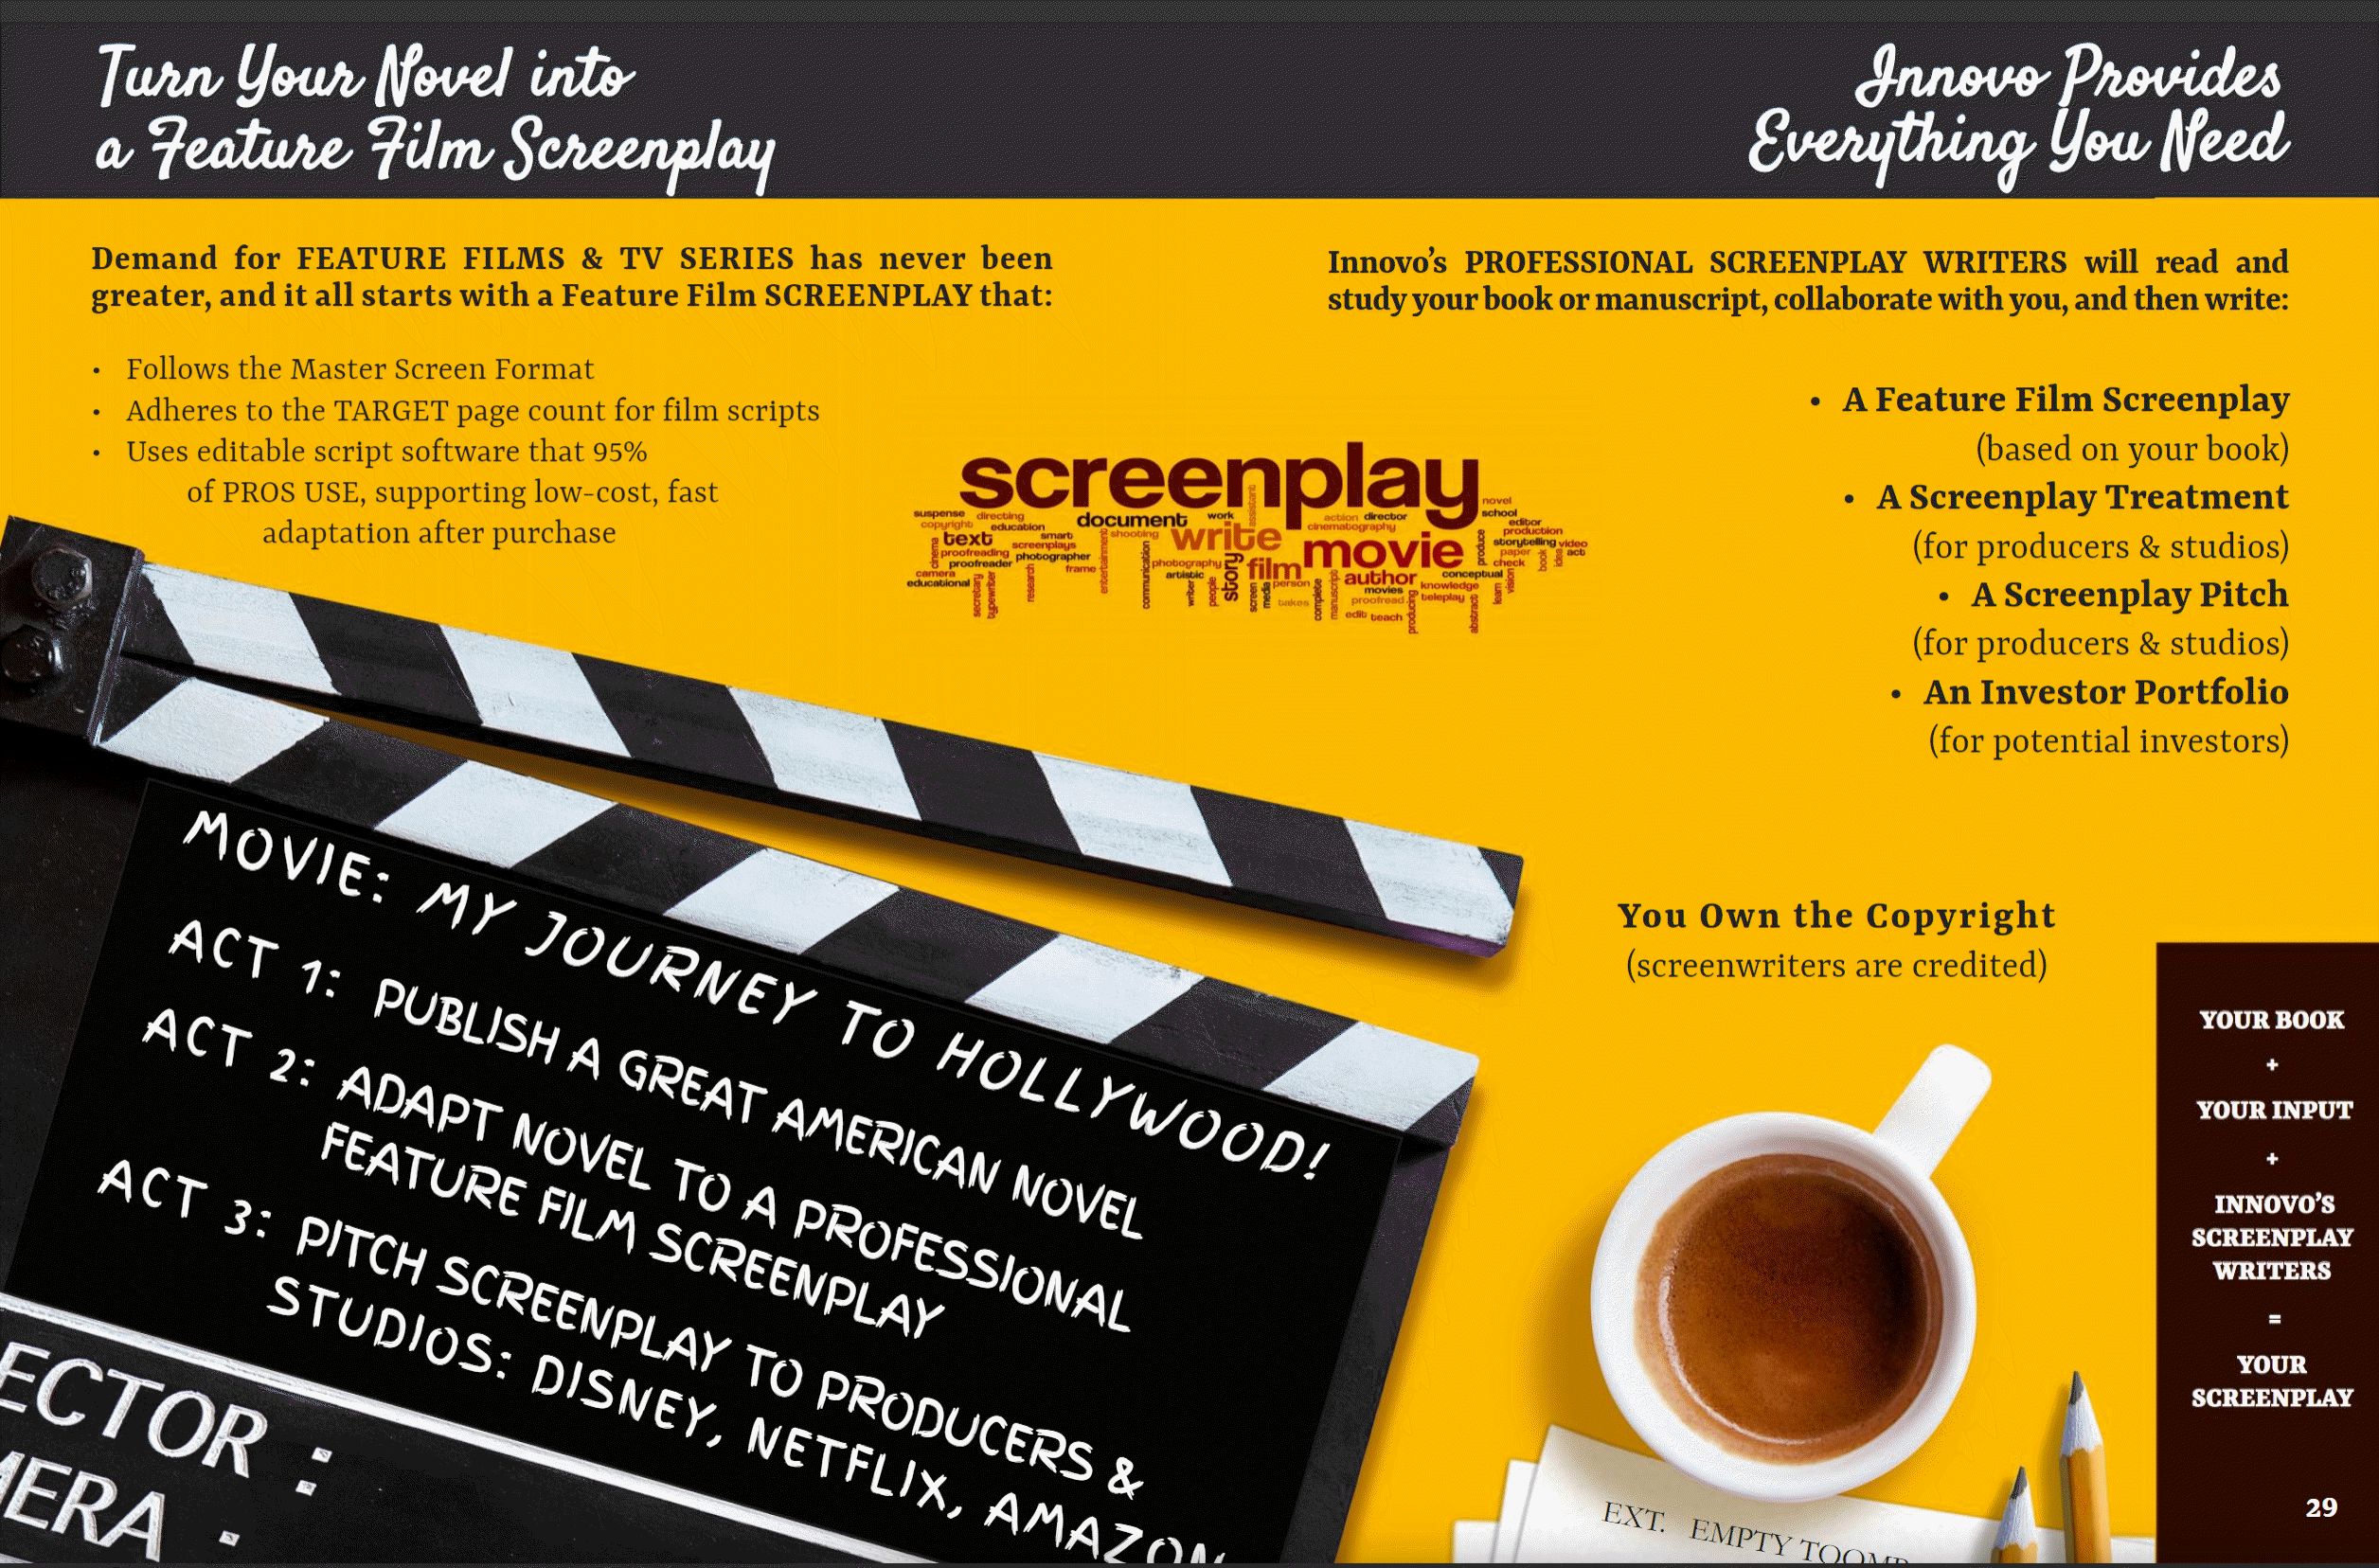 Innovo's Feature Film Screenplay Writing for Christian Authors, Artists, and Ministries